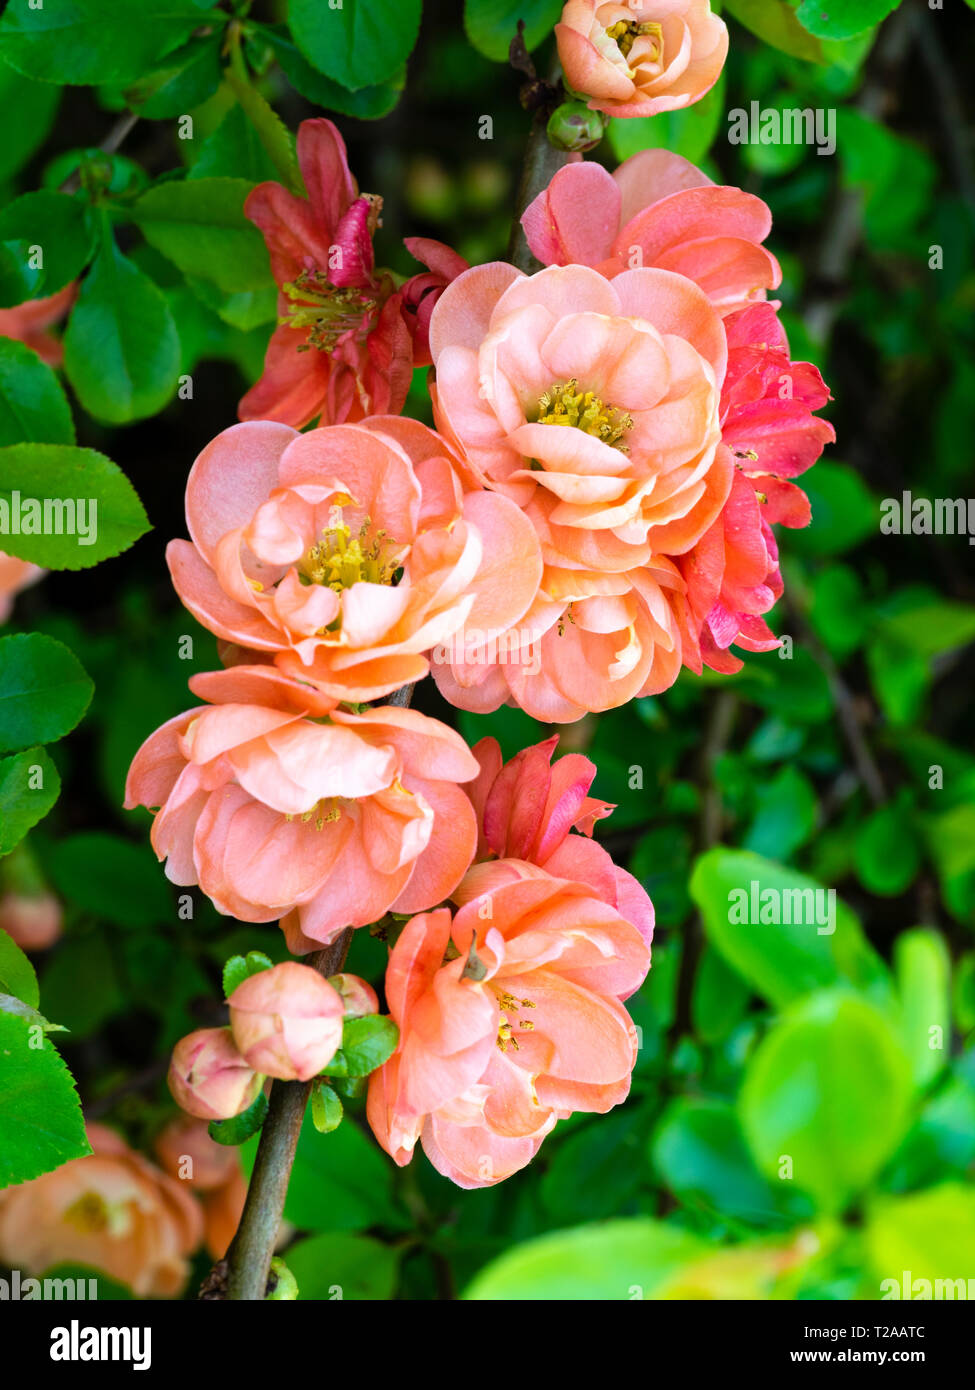 Coral pink, early spring semi double flowers of the ornamental Japanese quince, Chaenomeles x speciosa 'Geisha Girl' Stock Photo